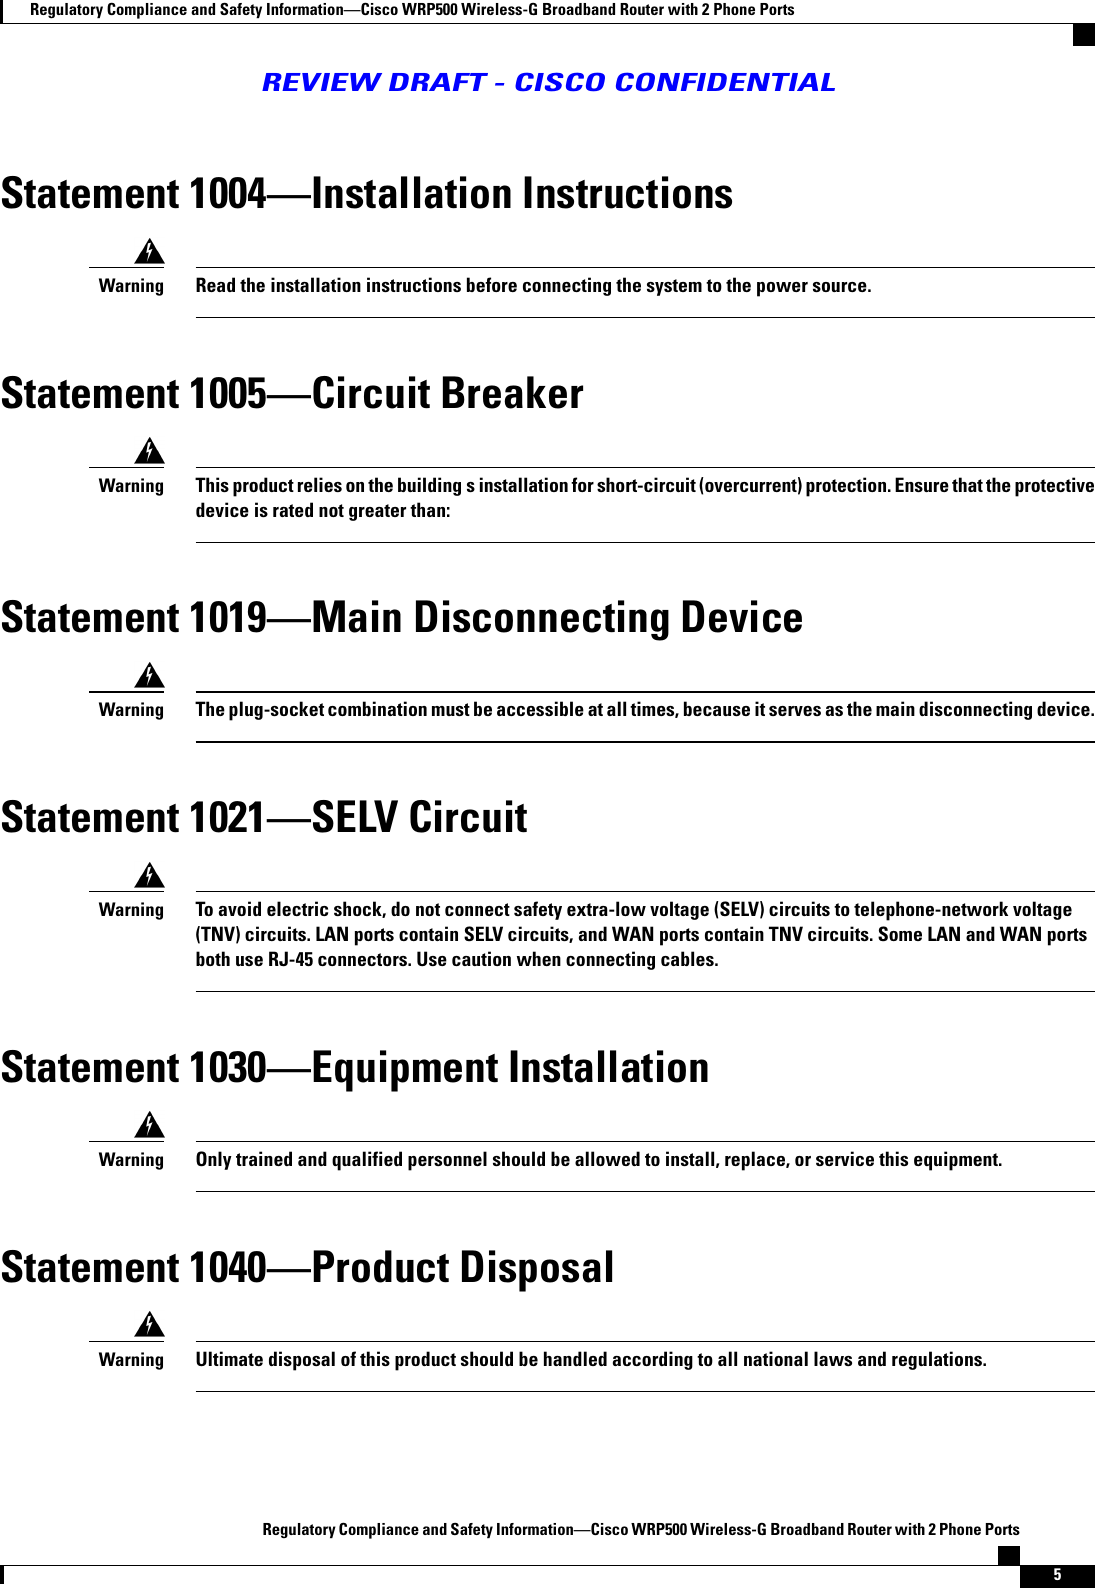 Statement 1004Installation InstructionsRead the installation instructions before connecting the system to the power source.WarningStatement 1005Circuit BreakerThis product relies on the building s installation for short-circuit (overcurrent) protection. Ensure that the protectivedevice is rated not greater than:WarningStatement 1019Main Disconnecting DeviceThe plug-socket combination must be accessible at all times, because it serves as the main disconnecting device.WarningStatement 1021SELV CircuitTo avoid electric shock, do not connect safety extra-low voltage (SELV) circuits to telephone-network voltage(TNV) circuits. LAN ports contain SELV circuits, and WAN ports contain TNV circuits. Some LAN and WAN portsboth use RJ-45 connectors. Use caution when connecting cables.WarningStatement 1030Equipment InstallationOnly trained and qualified personnel should be allowed to install, replace, or service this equipment.WarningStatement 1040Product DisposalUltimate disposal of this product should be handled according to all national laws and regulations.WarningRegulatory Compliance and Safety InformationCisco WRP500 Wireless-G Broadband Router with 2 Phone Ports5Regulatory Compliance and Safety InformationCisco WRP500 Wireless-G Broadband Router with 2 Phone PortsREVIEW DRAFT - CISCO CONFIDENTIAL